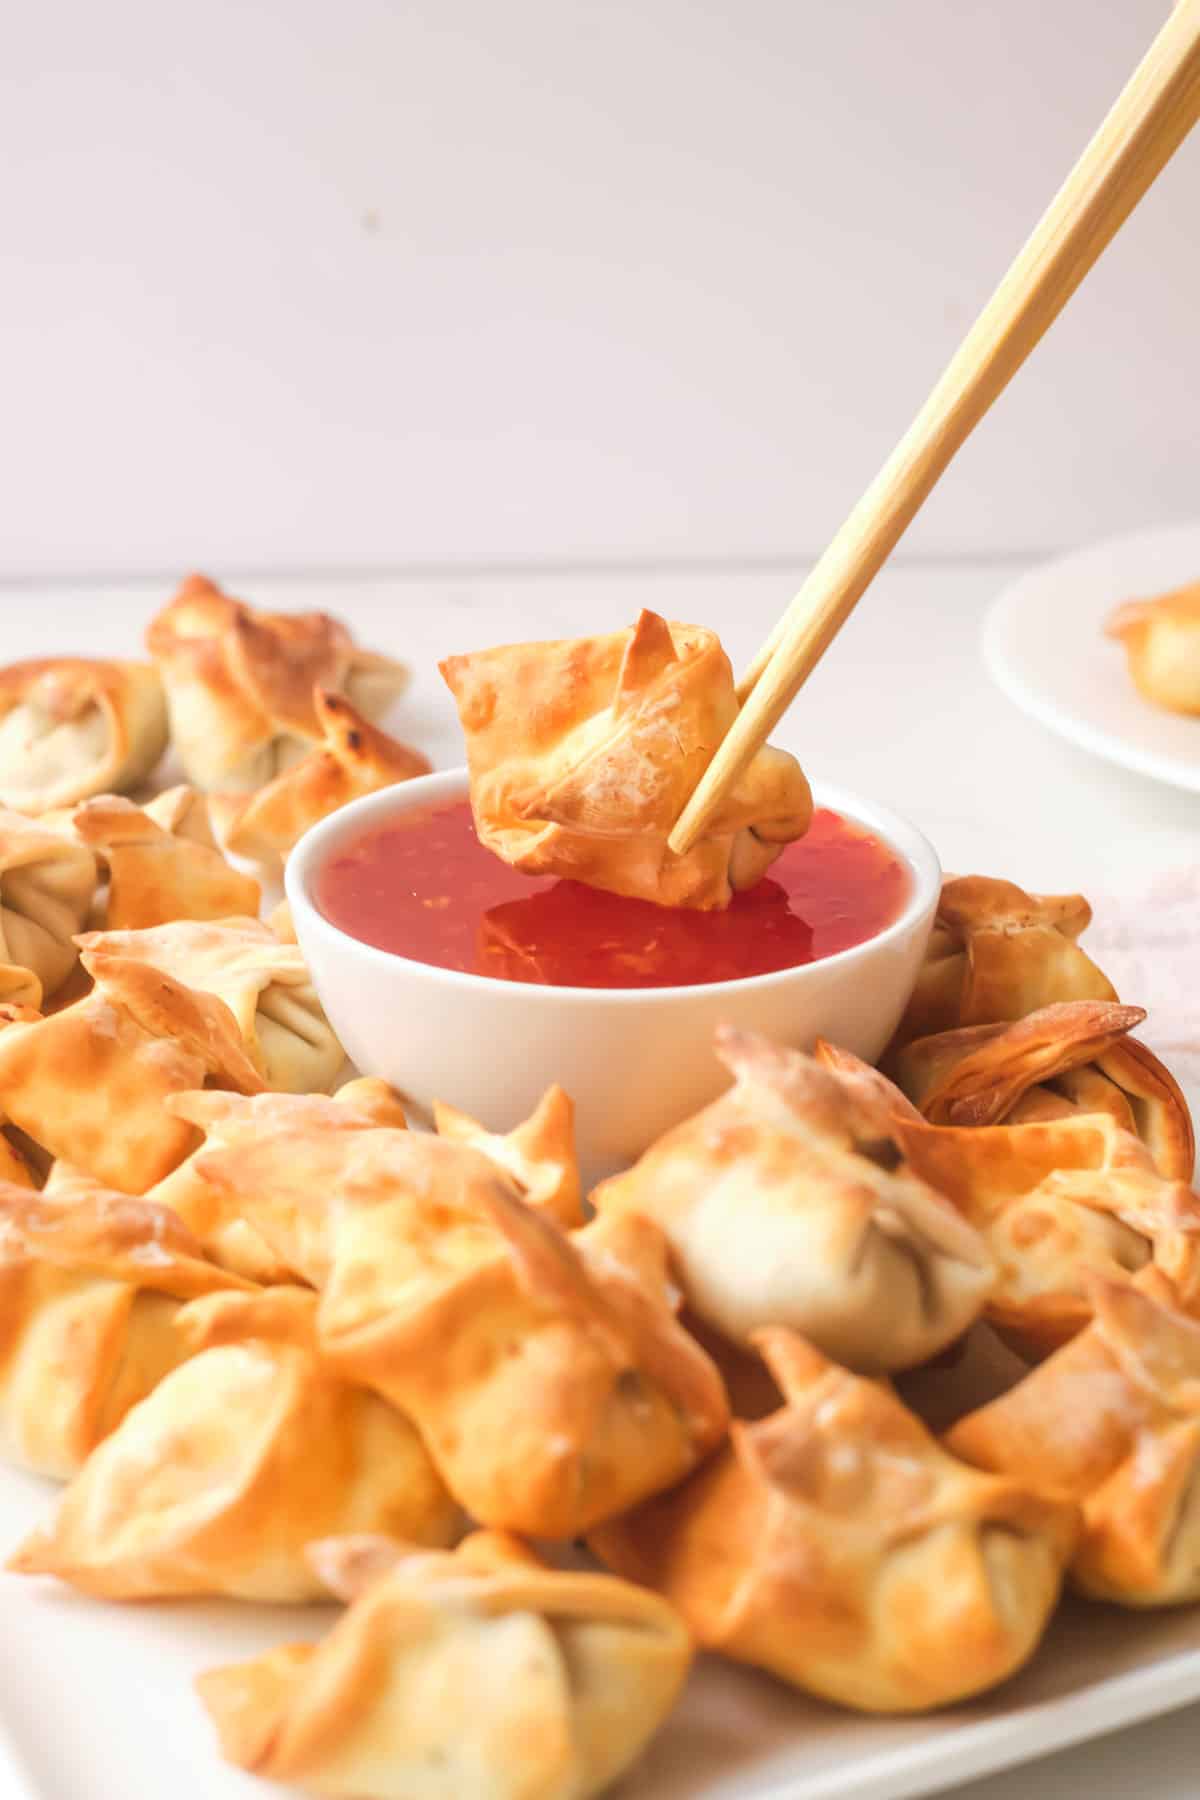 one of the air fryer wontons held by chopsticks and being dipped into sauce